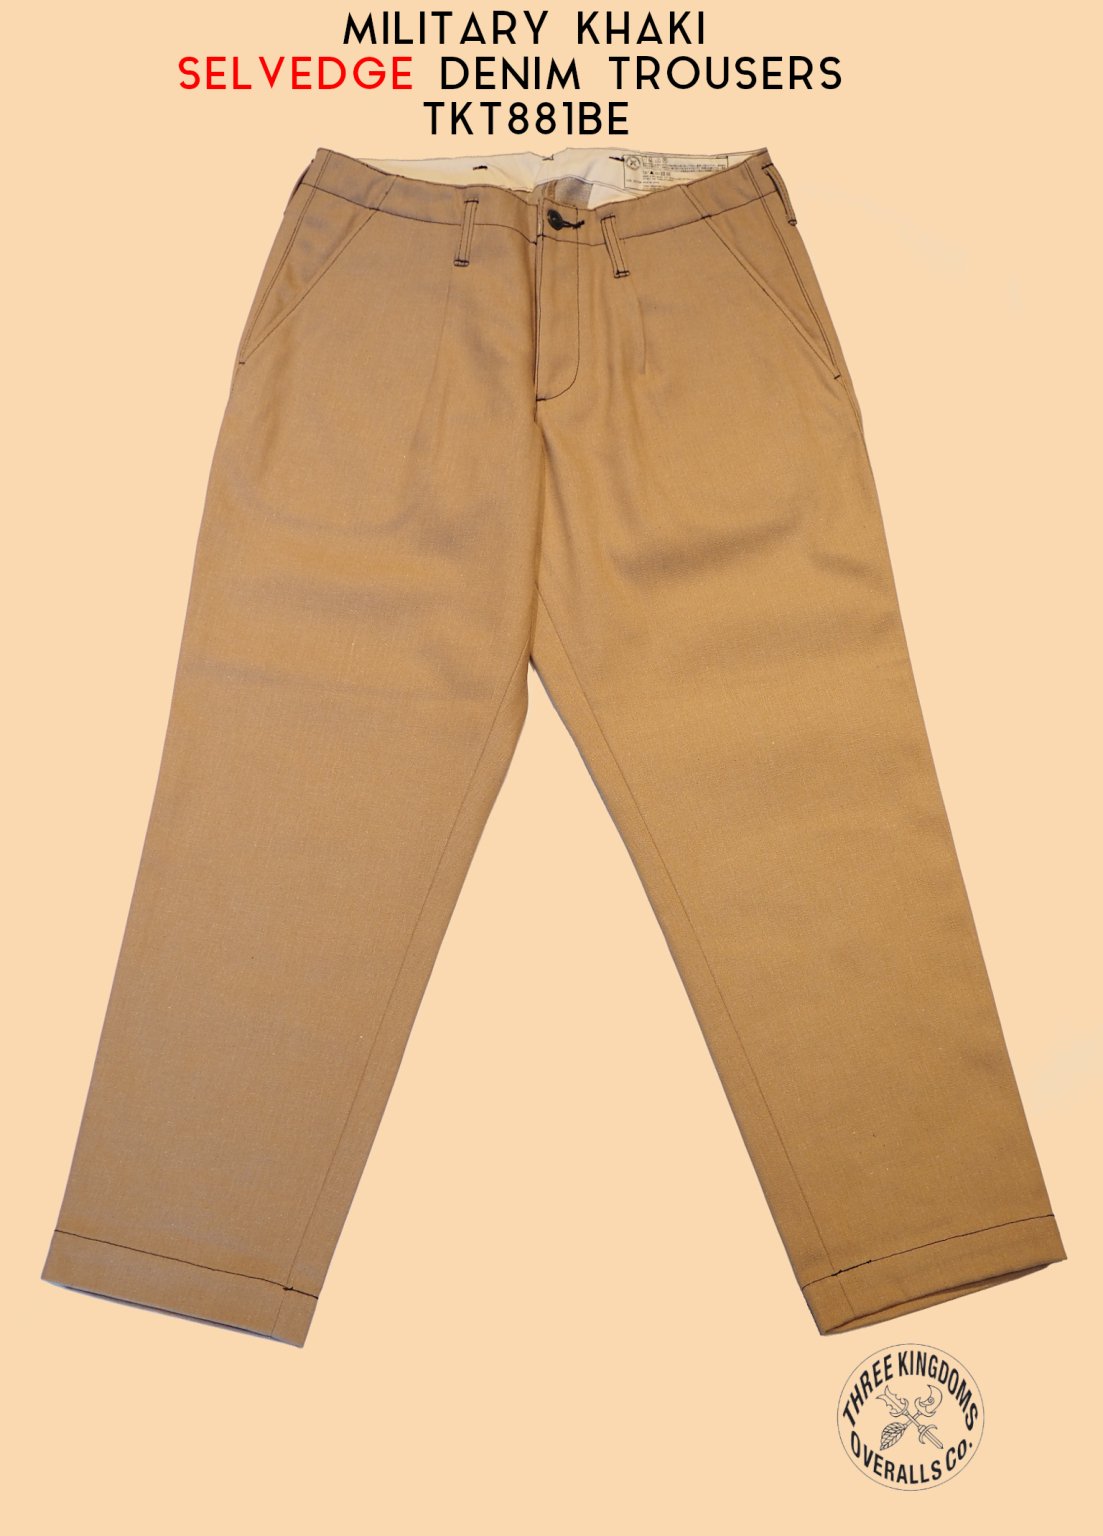 TKT881BE  MILITARY KHAKI SELVEDGE DENIM TROUSERS<img class='new_mark_img2' src='https://img.shop-pro.jp/img/new/icons14.gif' style='border:none;display:inline;margin:0px;padding:0px;width:auto;' />